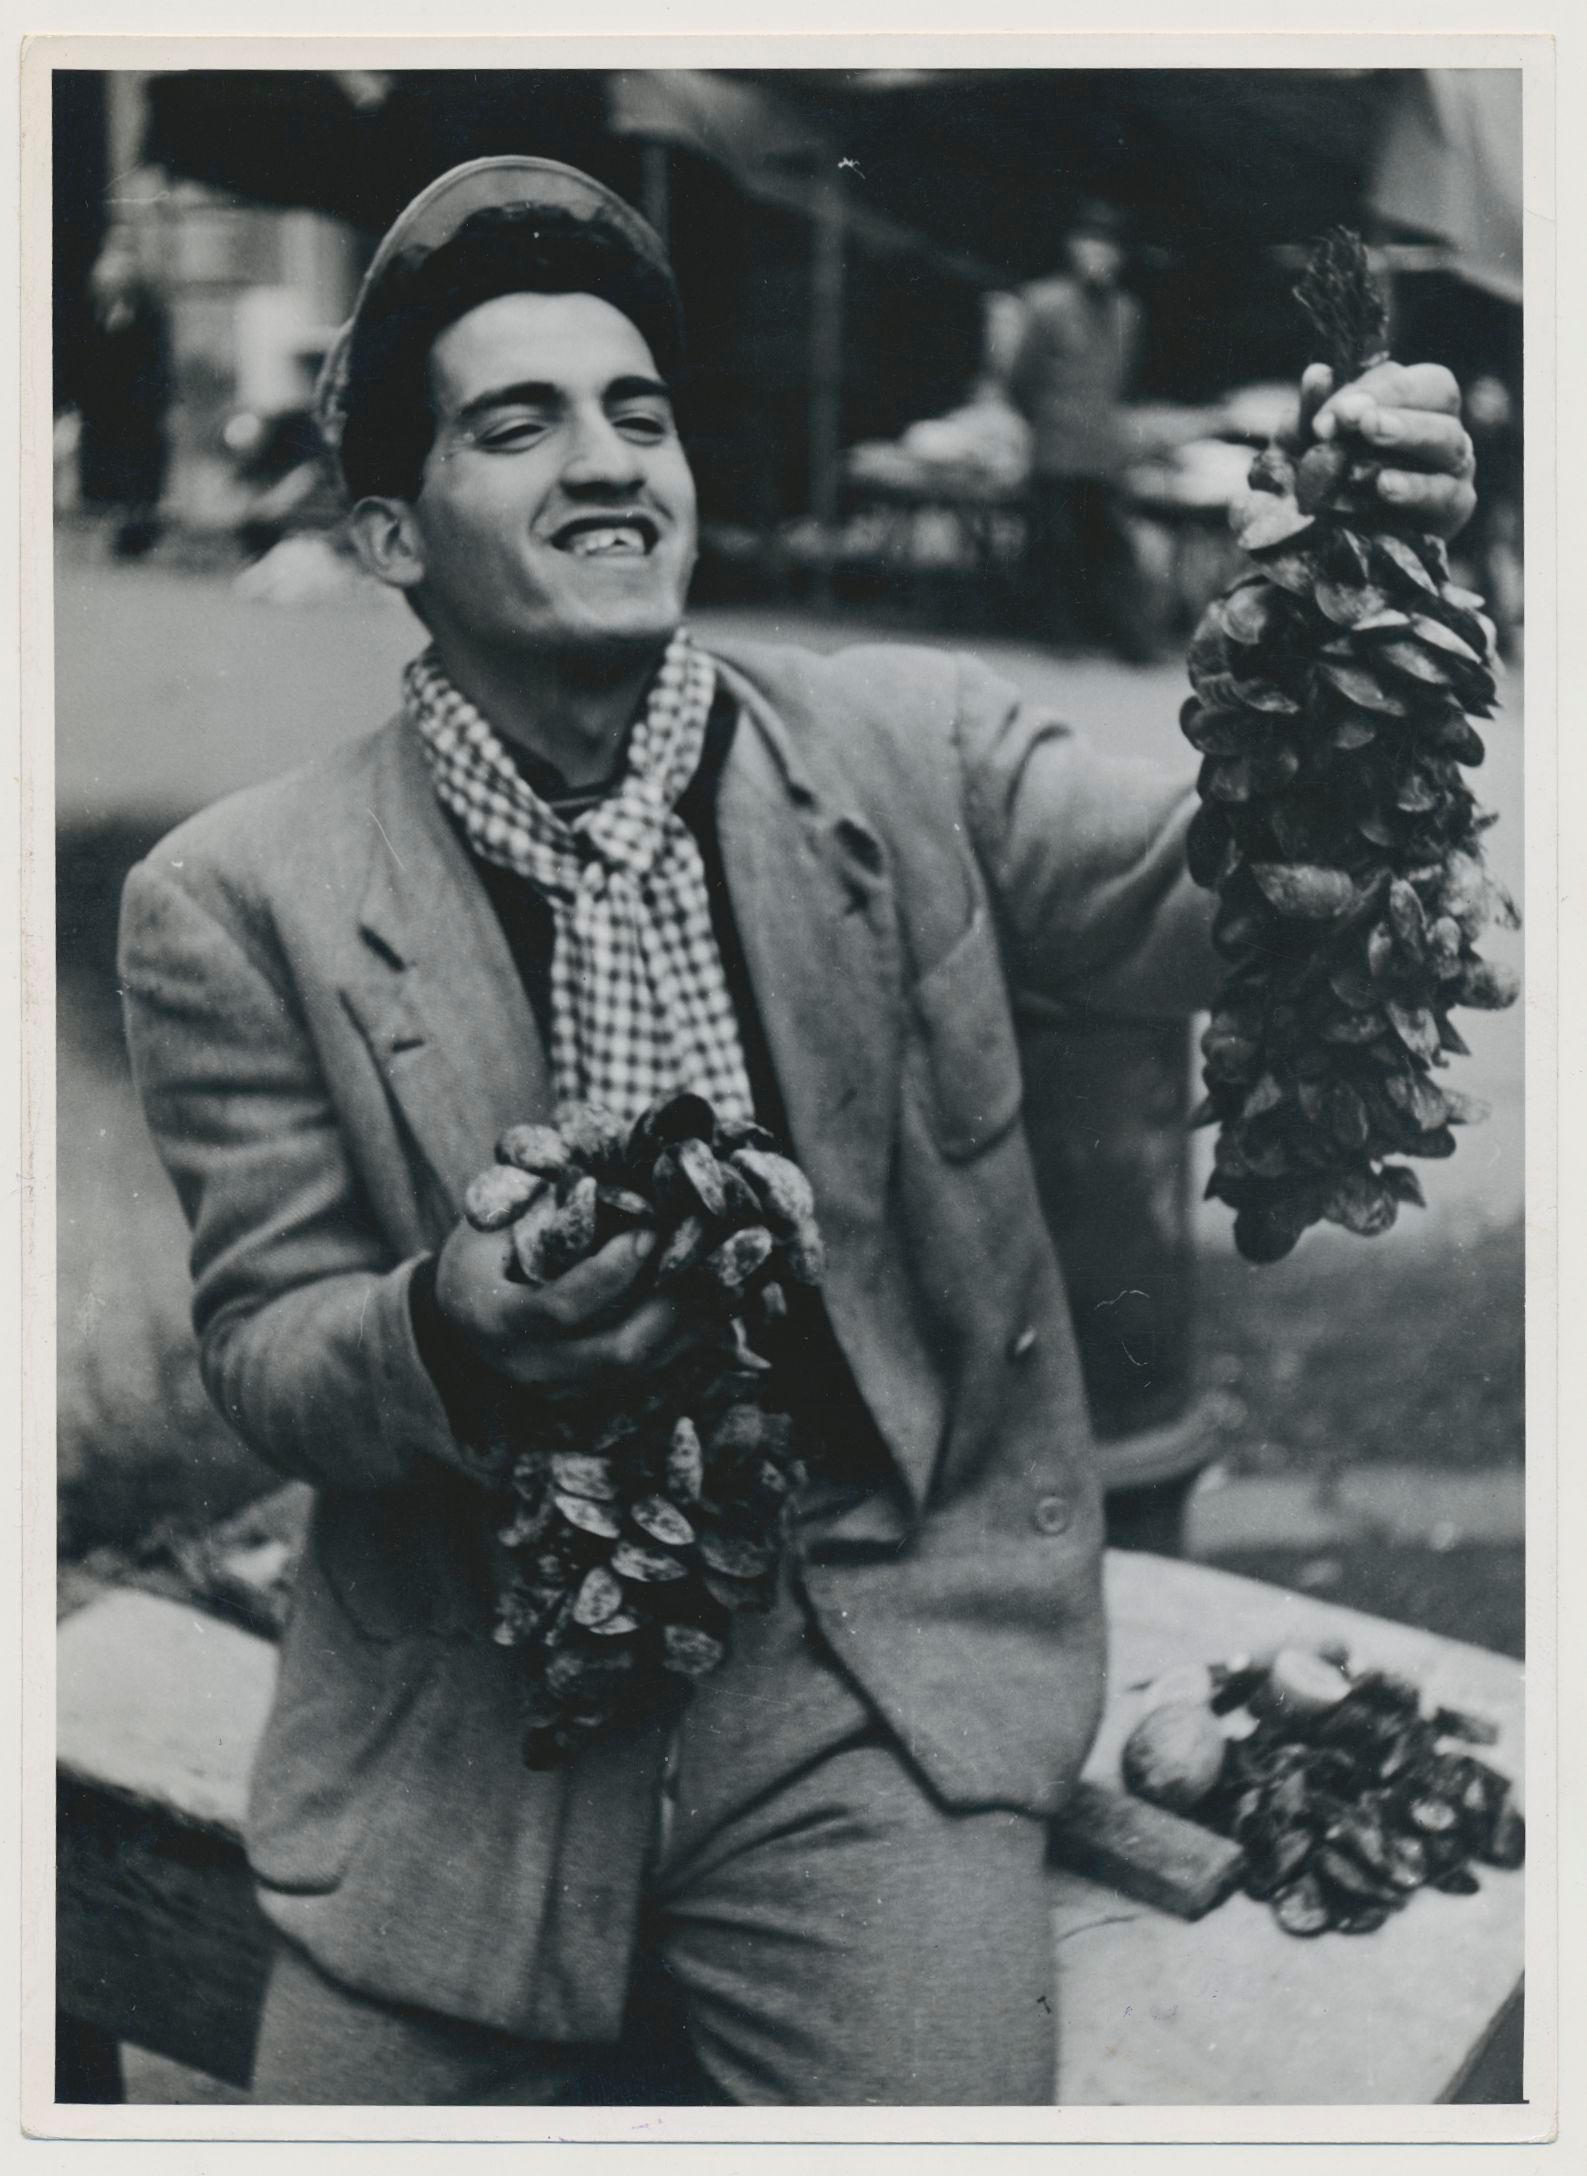 Erich Andres Portrait Photograph - Man, Market, Street Photography, Black and White, Italy 1950s, 17, 8 x 13 cm